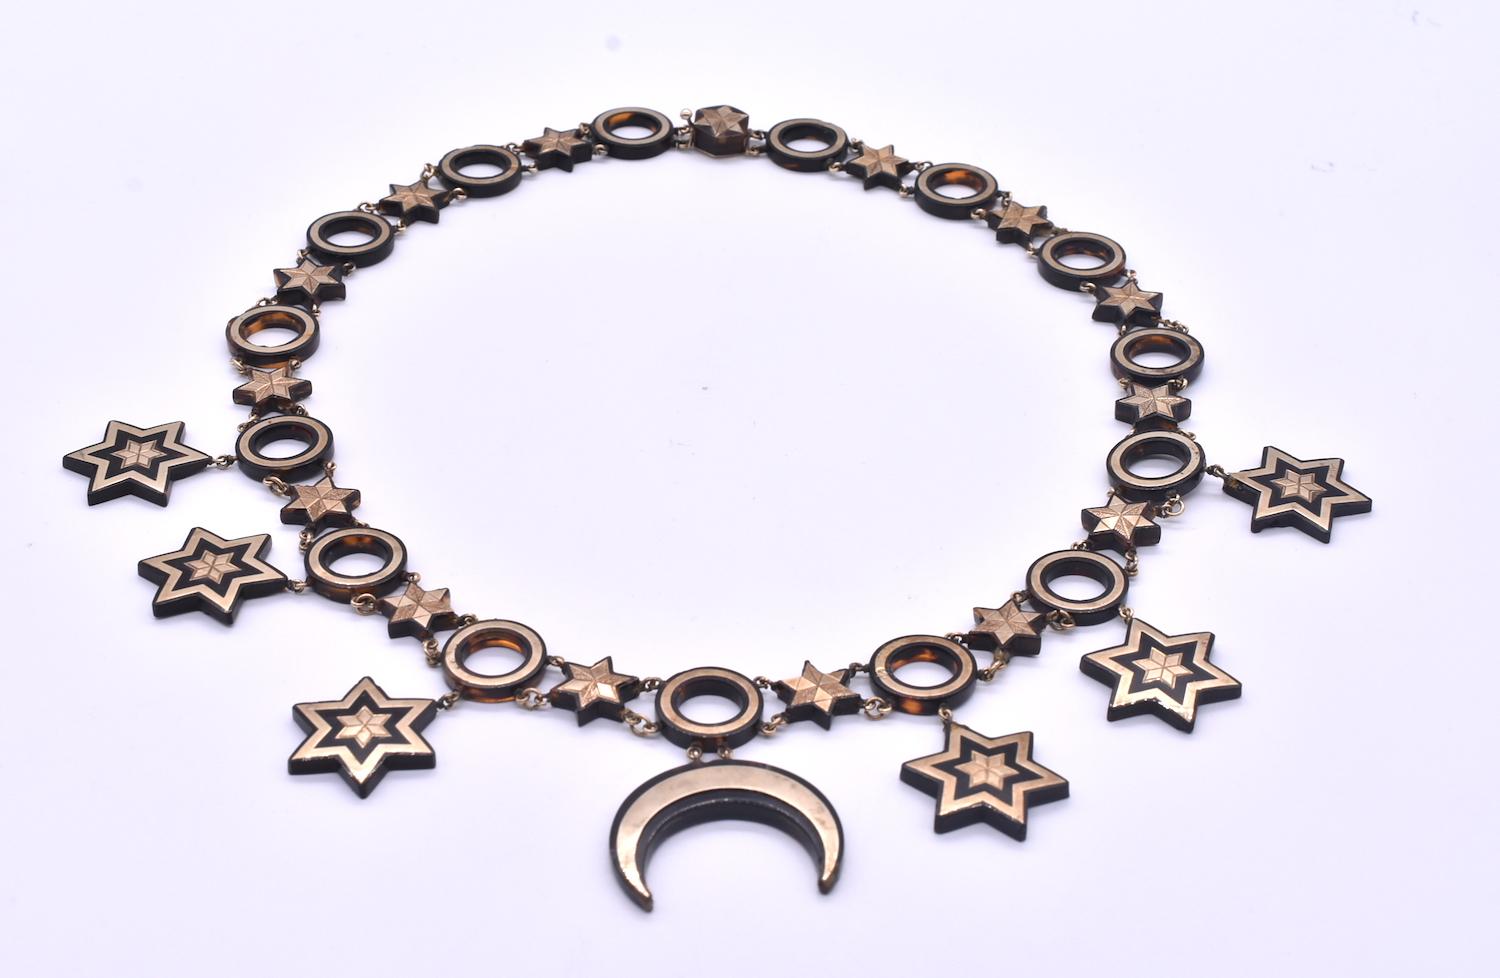 This is an unusual pique necklace with pique star and circle links throughout. From each circle link dangles a larger star pendant, while a single crescent moon pendant takes center stage. The pendants and links are adorned with inlaid gold. 

Pique